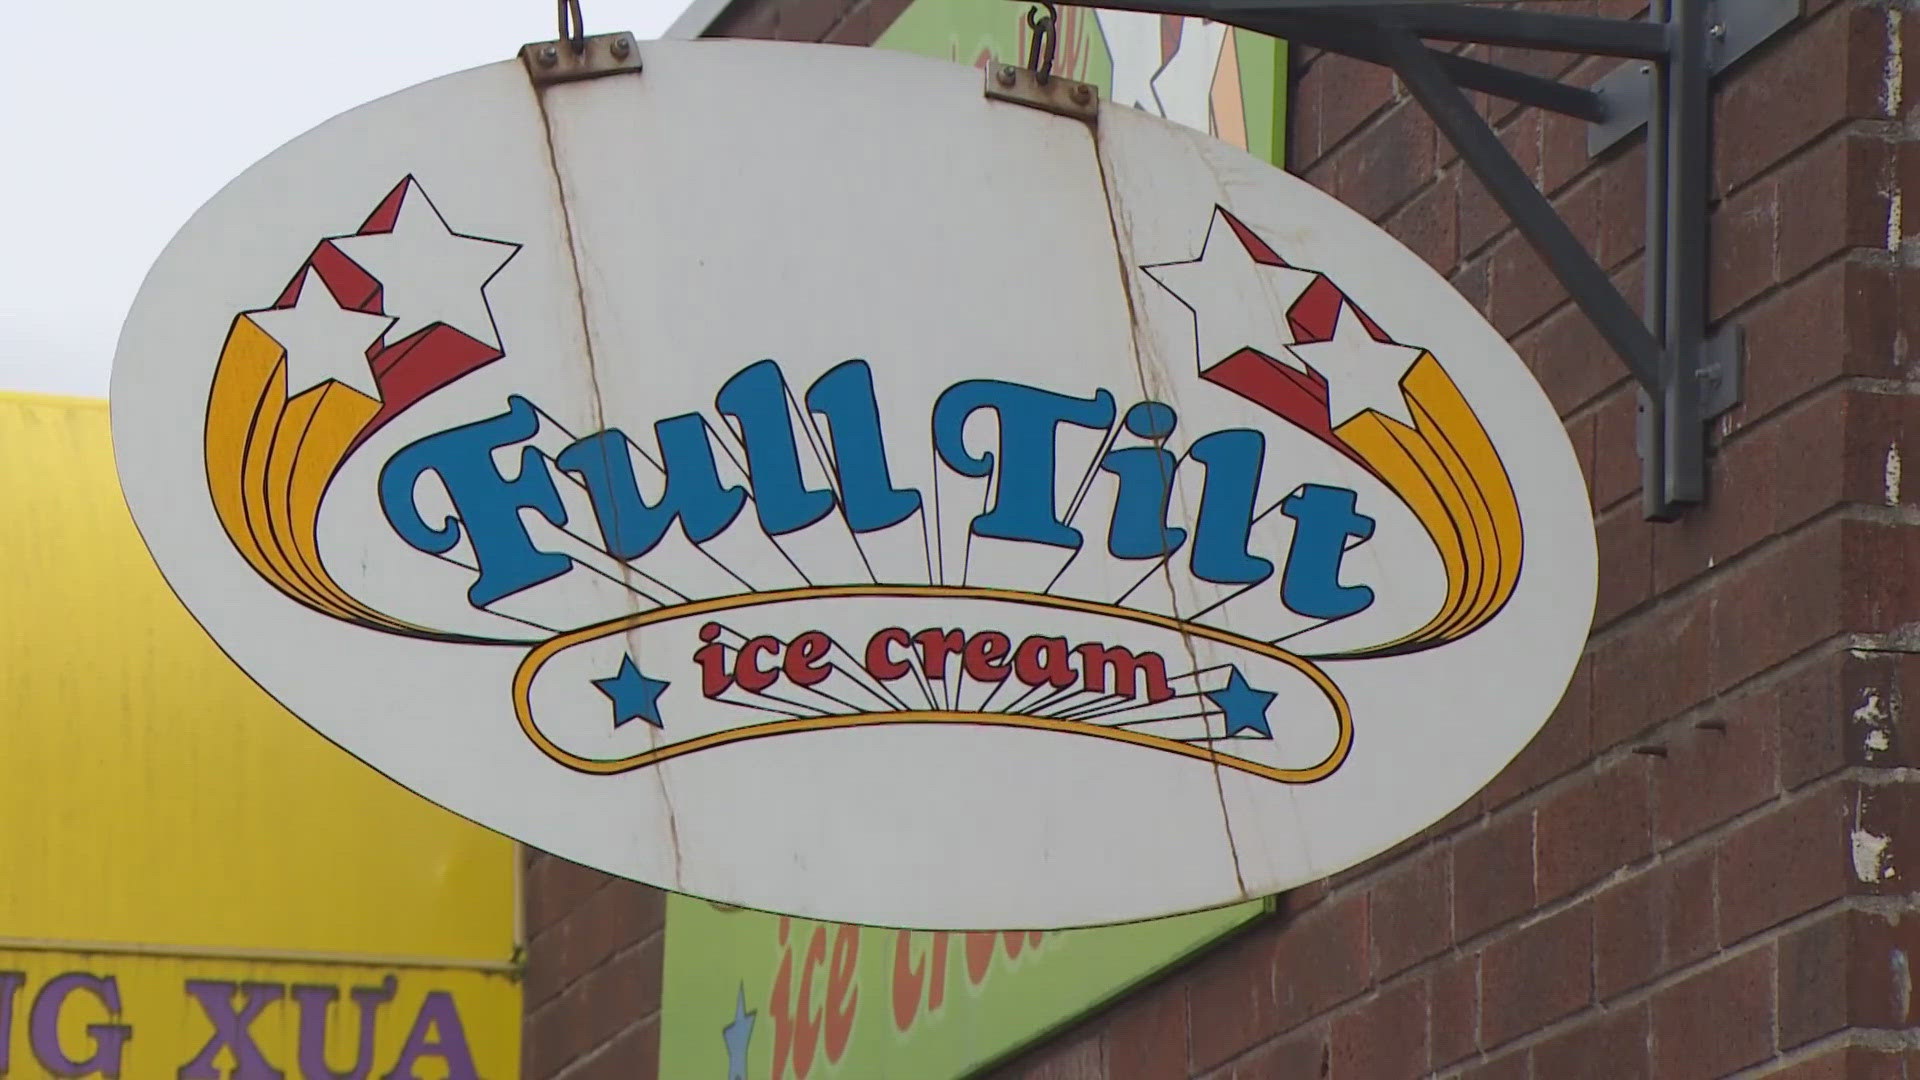 The closure comes after the owner of Full Tilt, Justin Cline, died from a heart attack in early March.